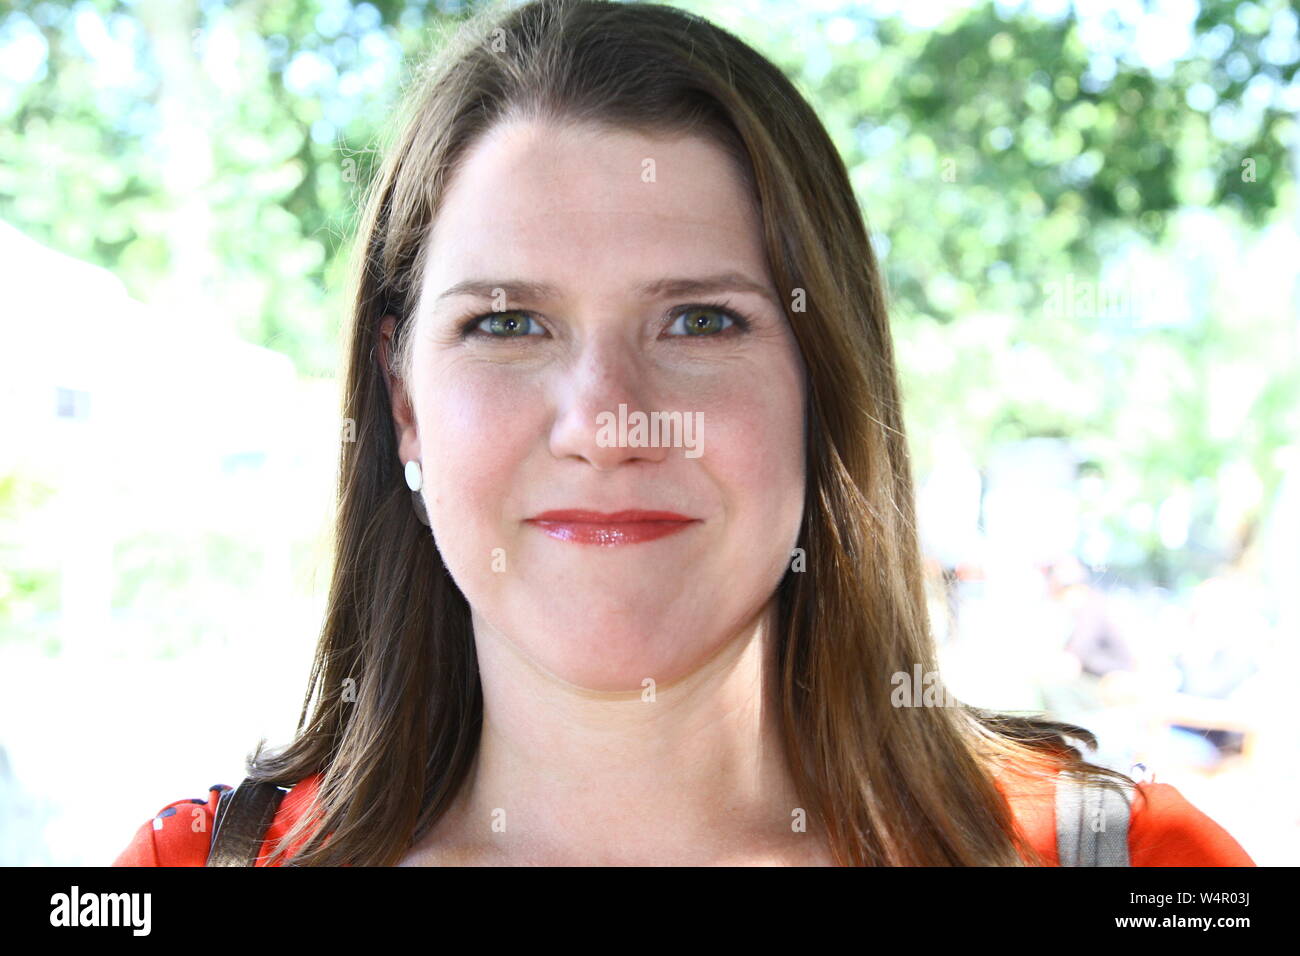 JO SWINSON IN WESTMINSTER ON THE 24TH JULY 2019. LEADER OF THE LIBERAL DEMOCRATS. LIB DEMS. MPS. BRITISH POLITICIANS. UK POLITICS. STOP BREXIT.  REVOKE ARTICAL 50. RUSSELL MOORE PORTFOLIO PAGE. Stock Photo